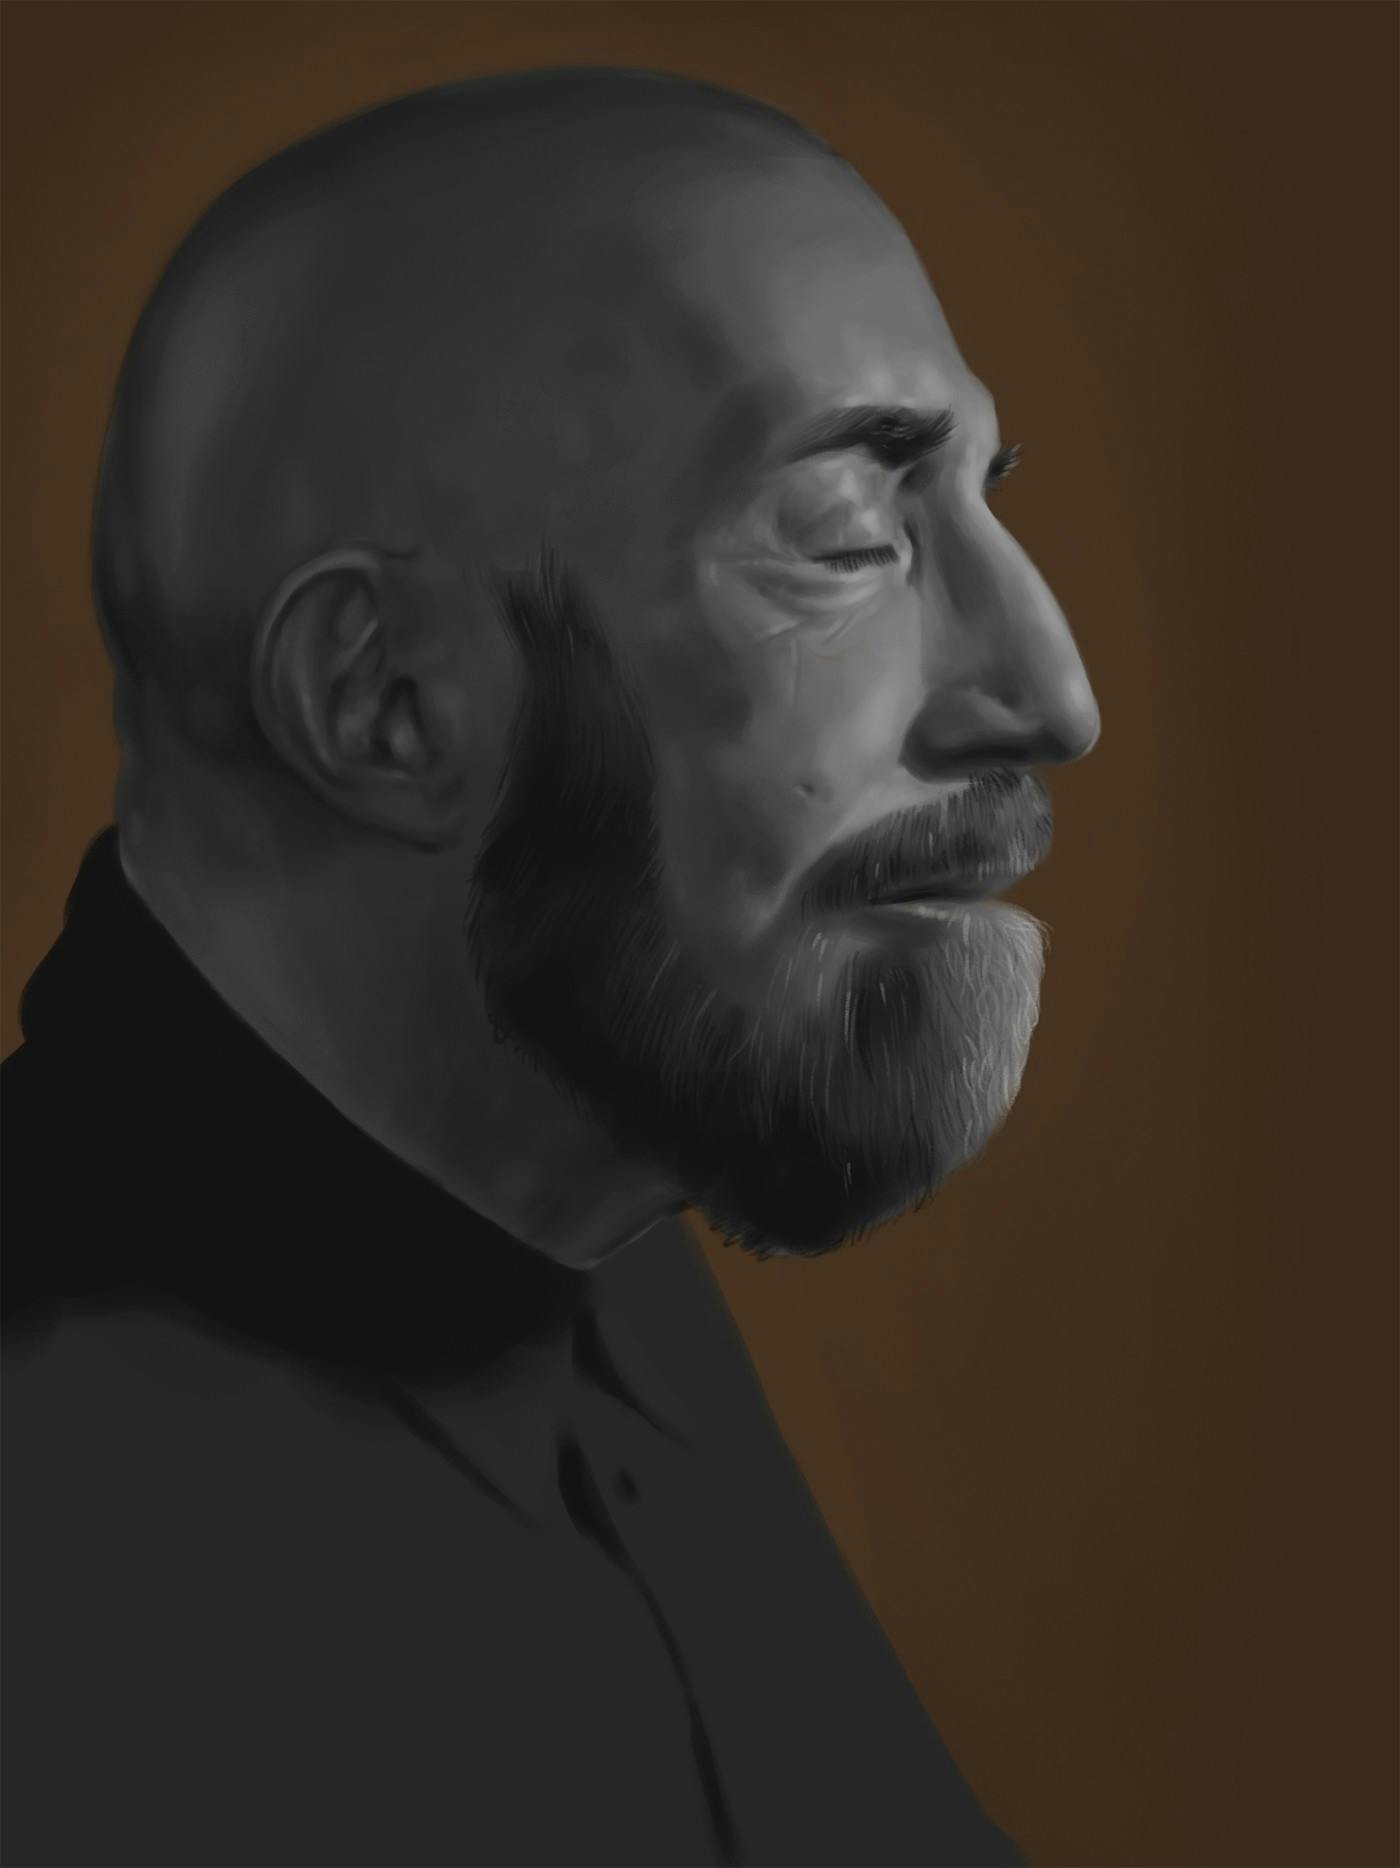 A digital painting of a bald, bearded man in profile with his eyes closed; he is painted in greyscale and is atop a brown background.